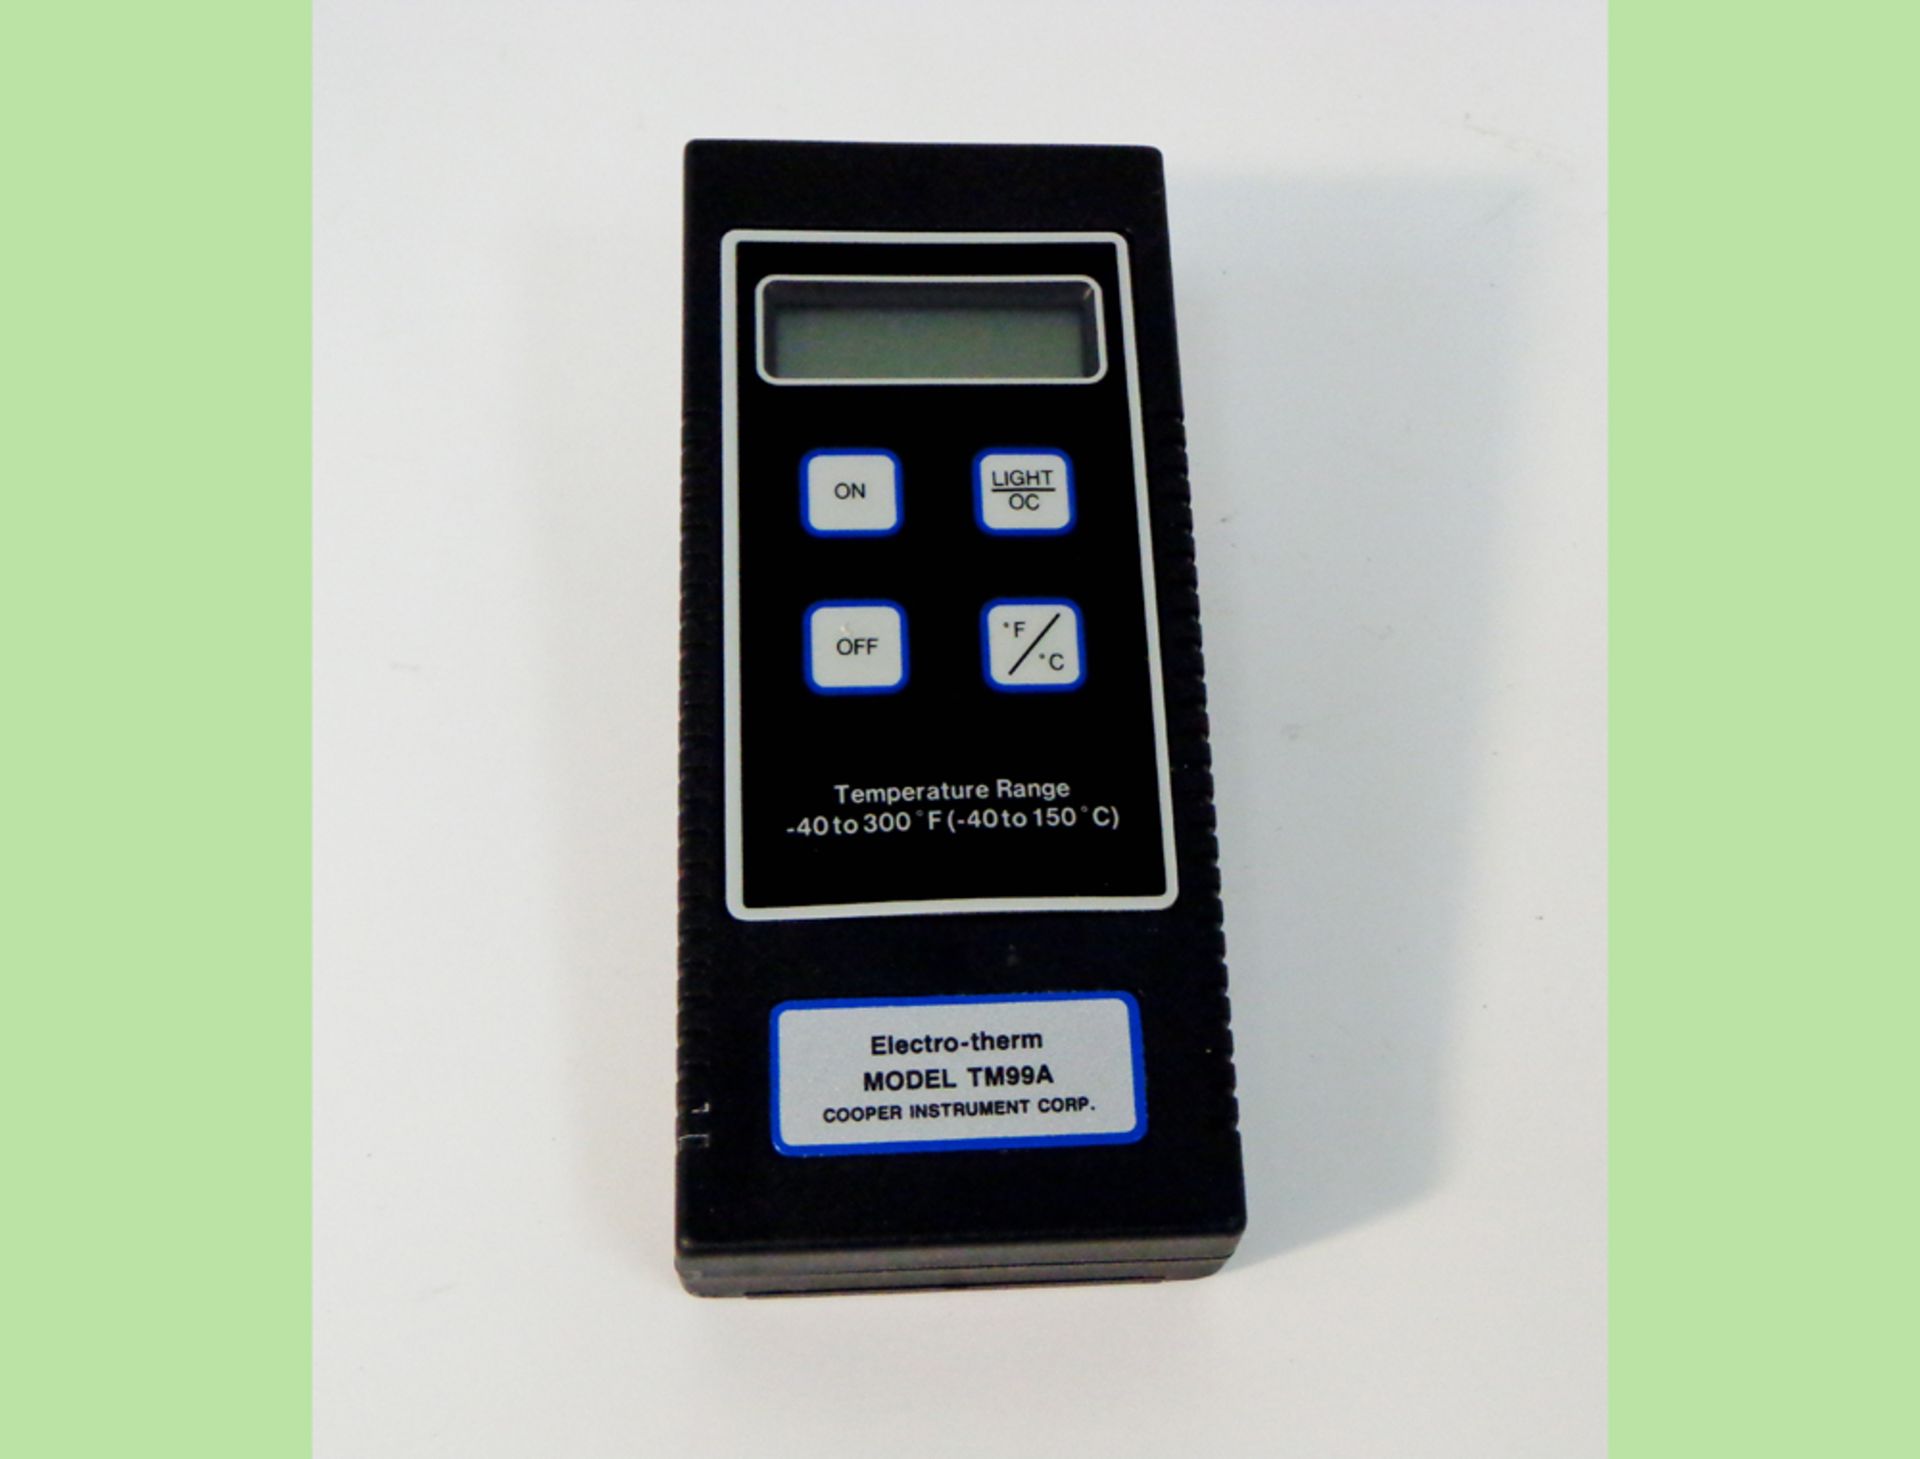 Cooper Instruments Electro-Thermal Digital Thermometer, Model TM99A, temp. range -40 - 150°C, serial